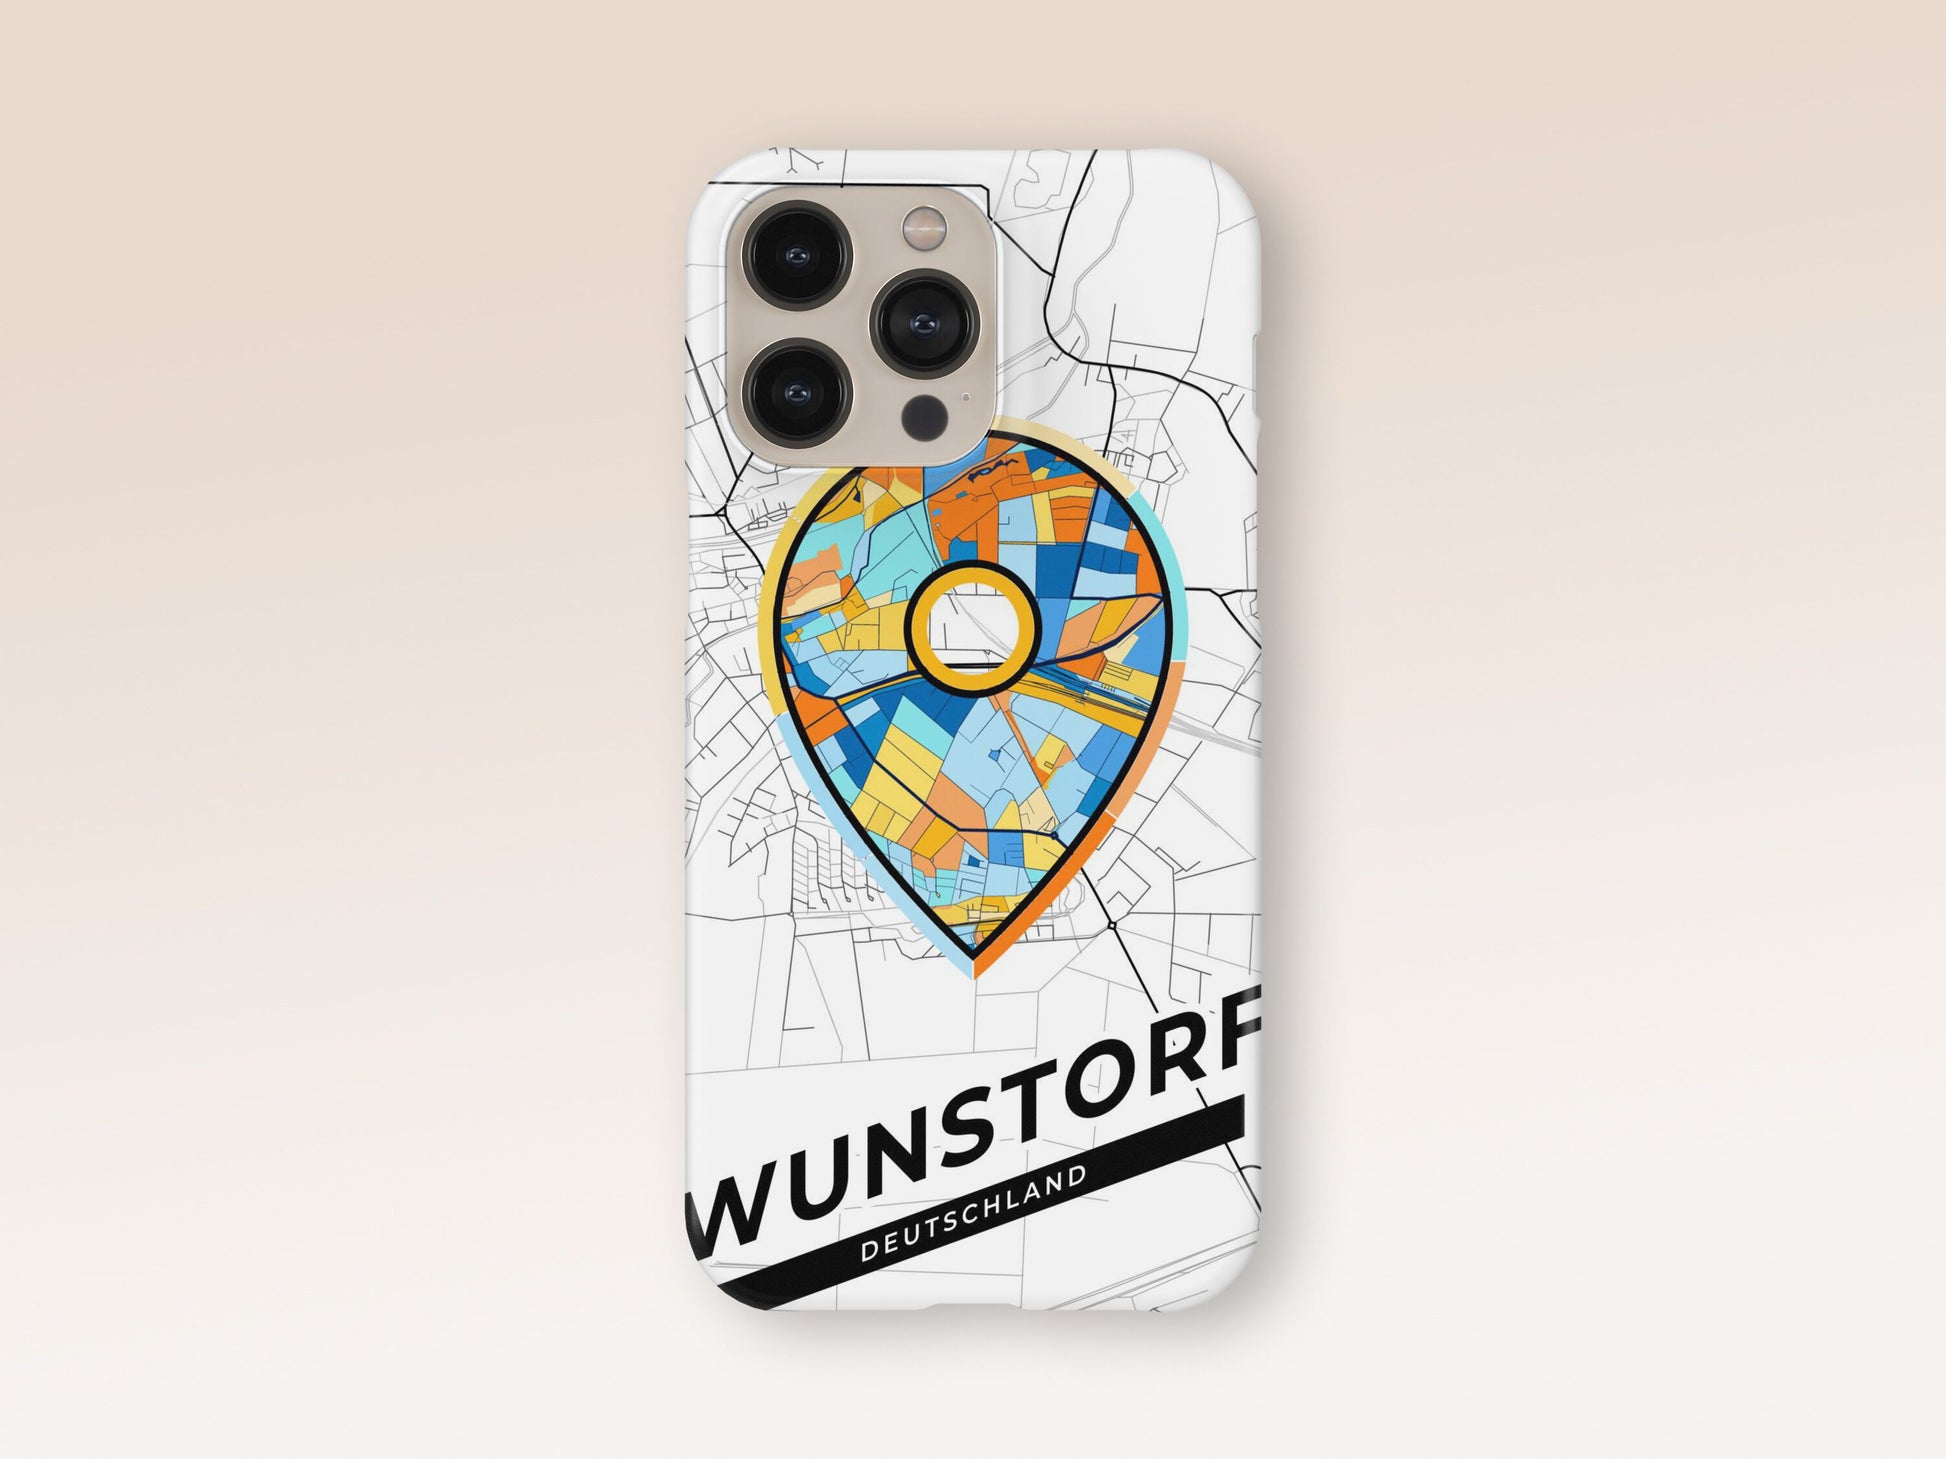 Wunstorf Deutschland slim phone case with colorful icon 1